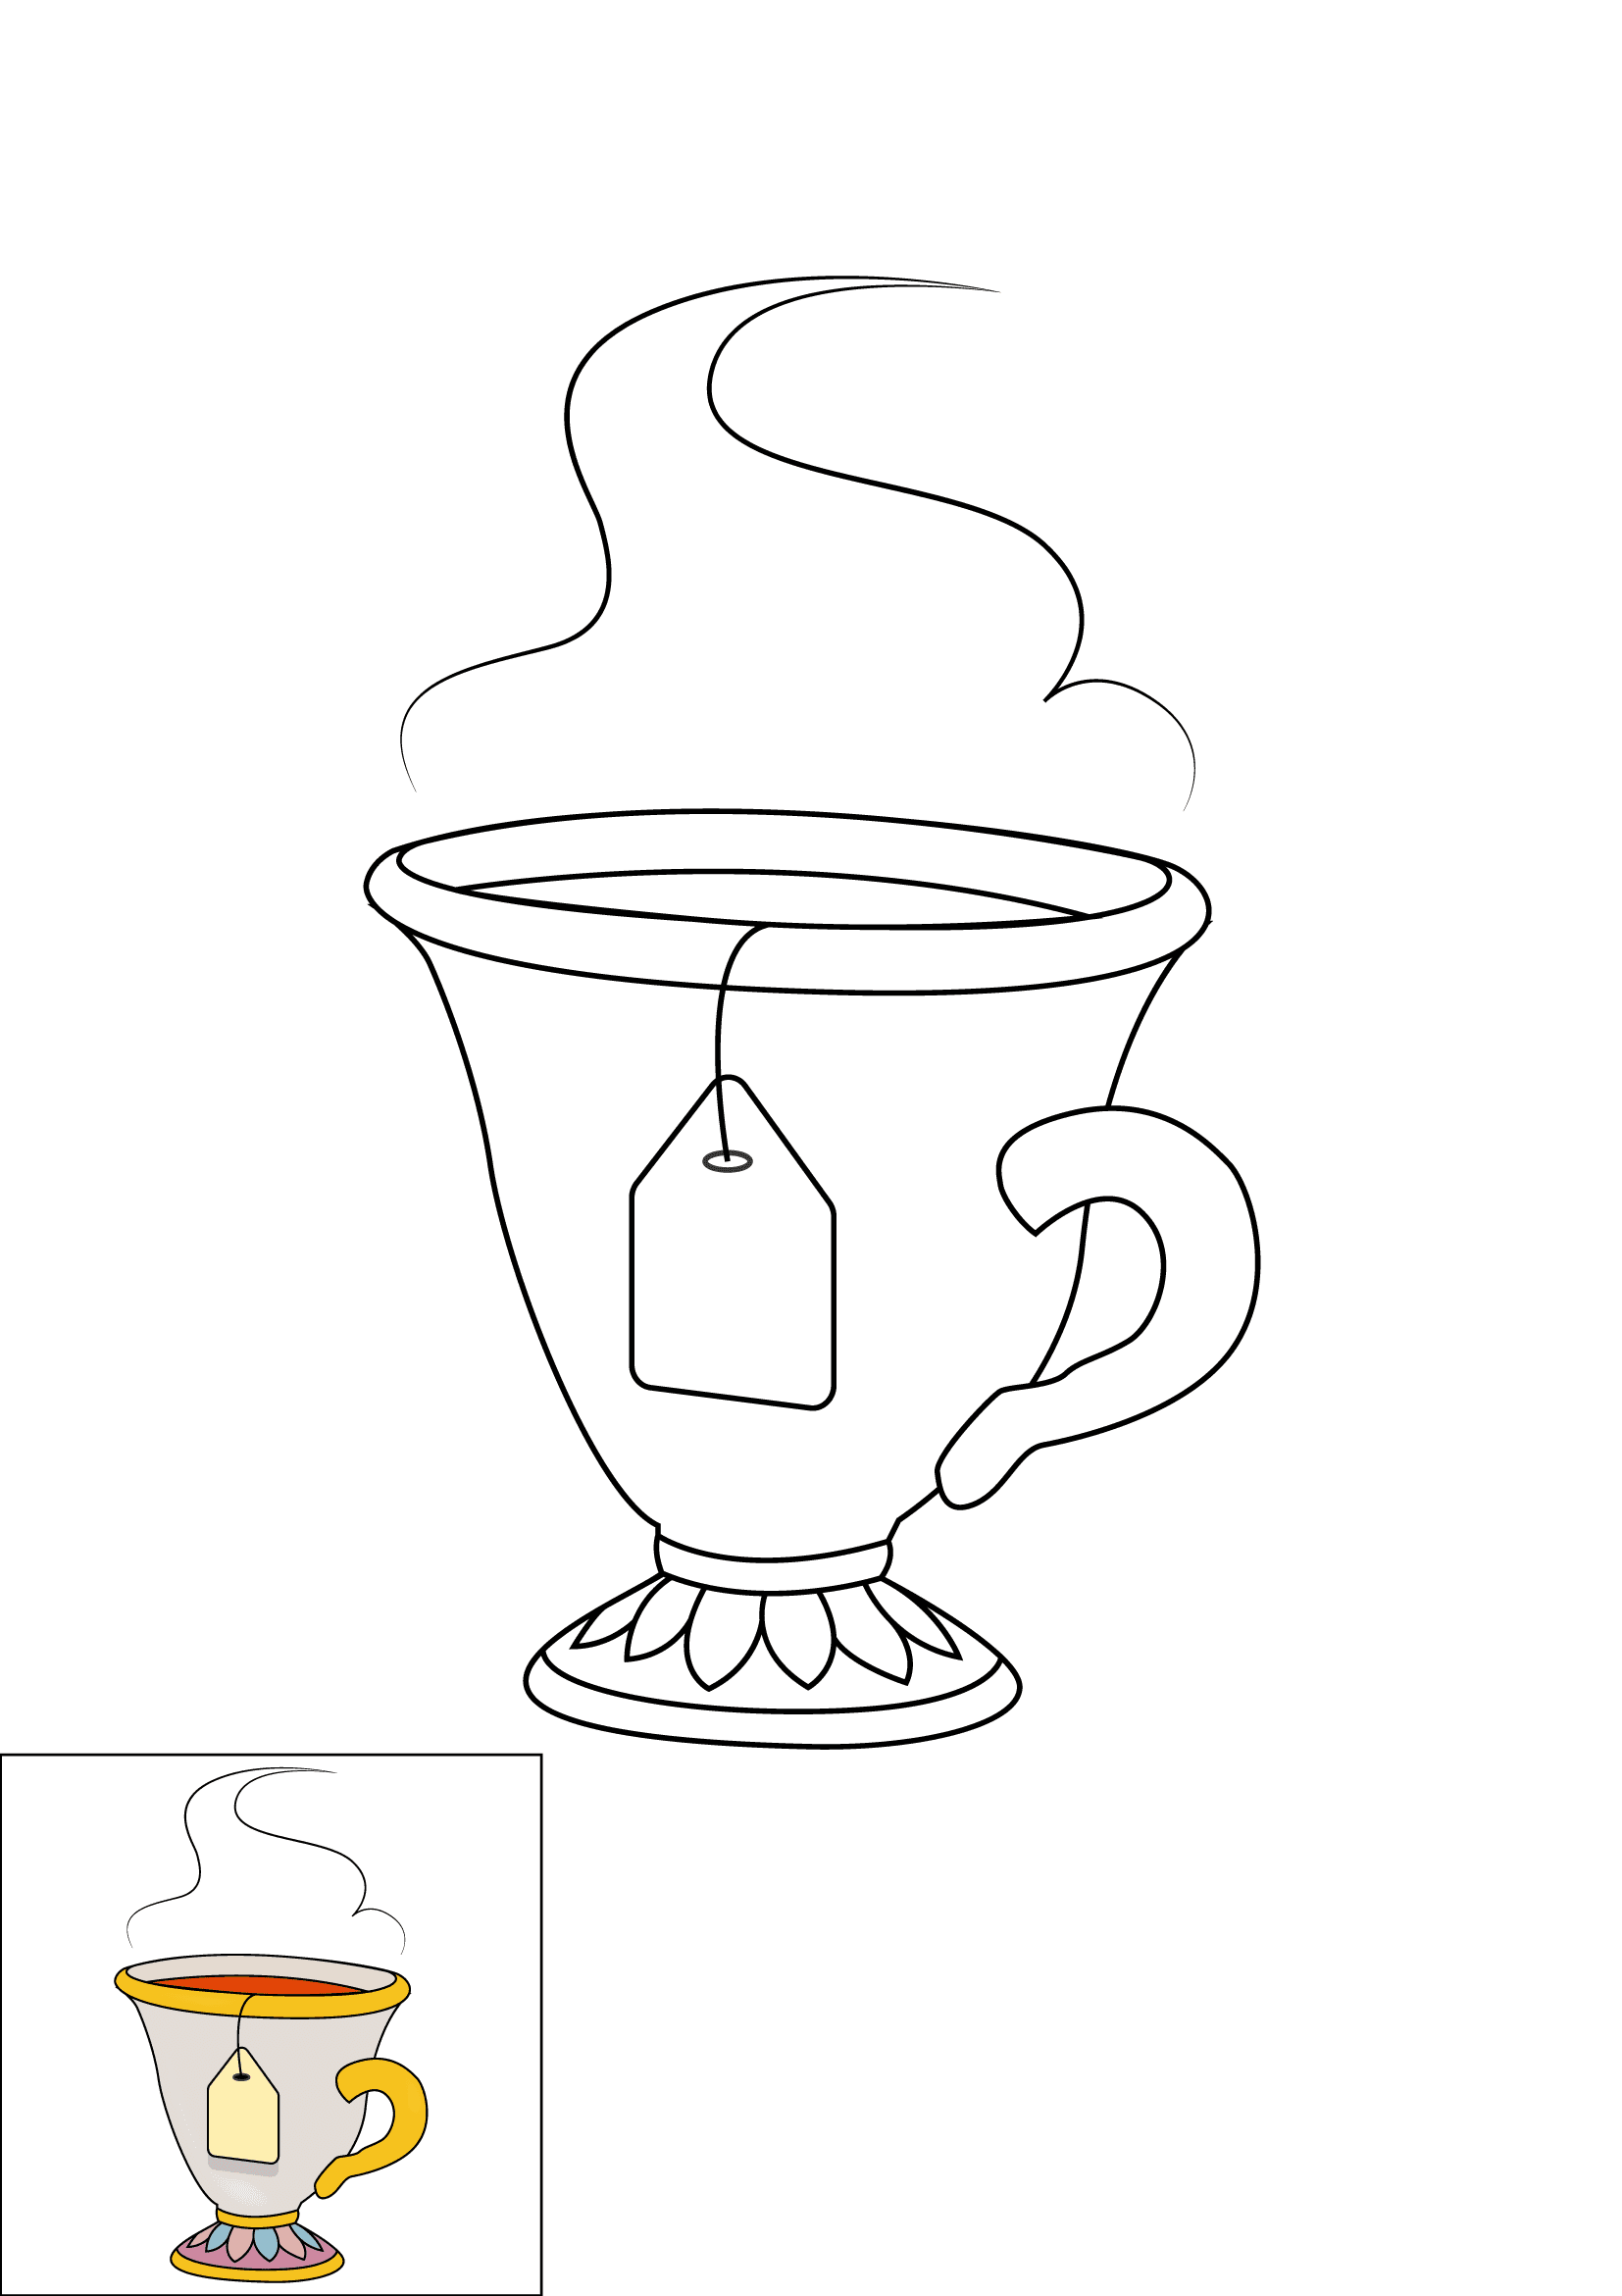 How to Draw A Tea Cup Step by Step Printable Color